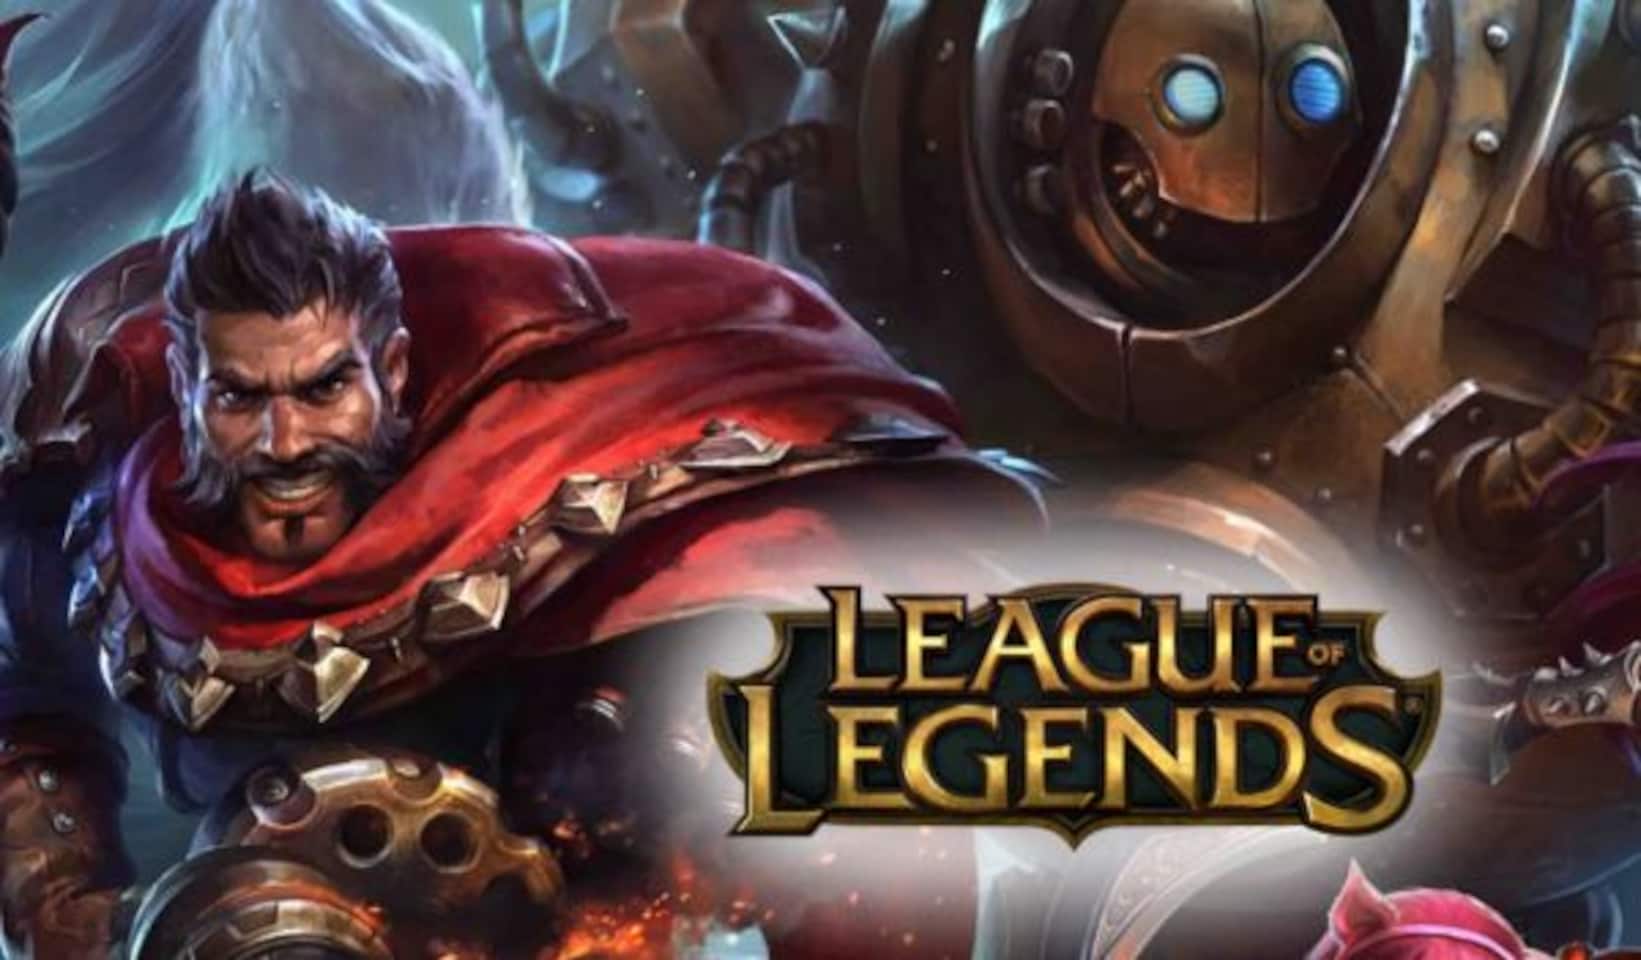 of Key Cheap EUR Gift Legends 10 EUROPE Card - - League - Buy Riot